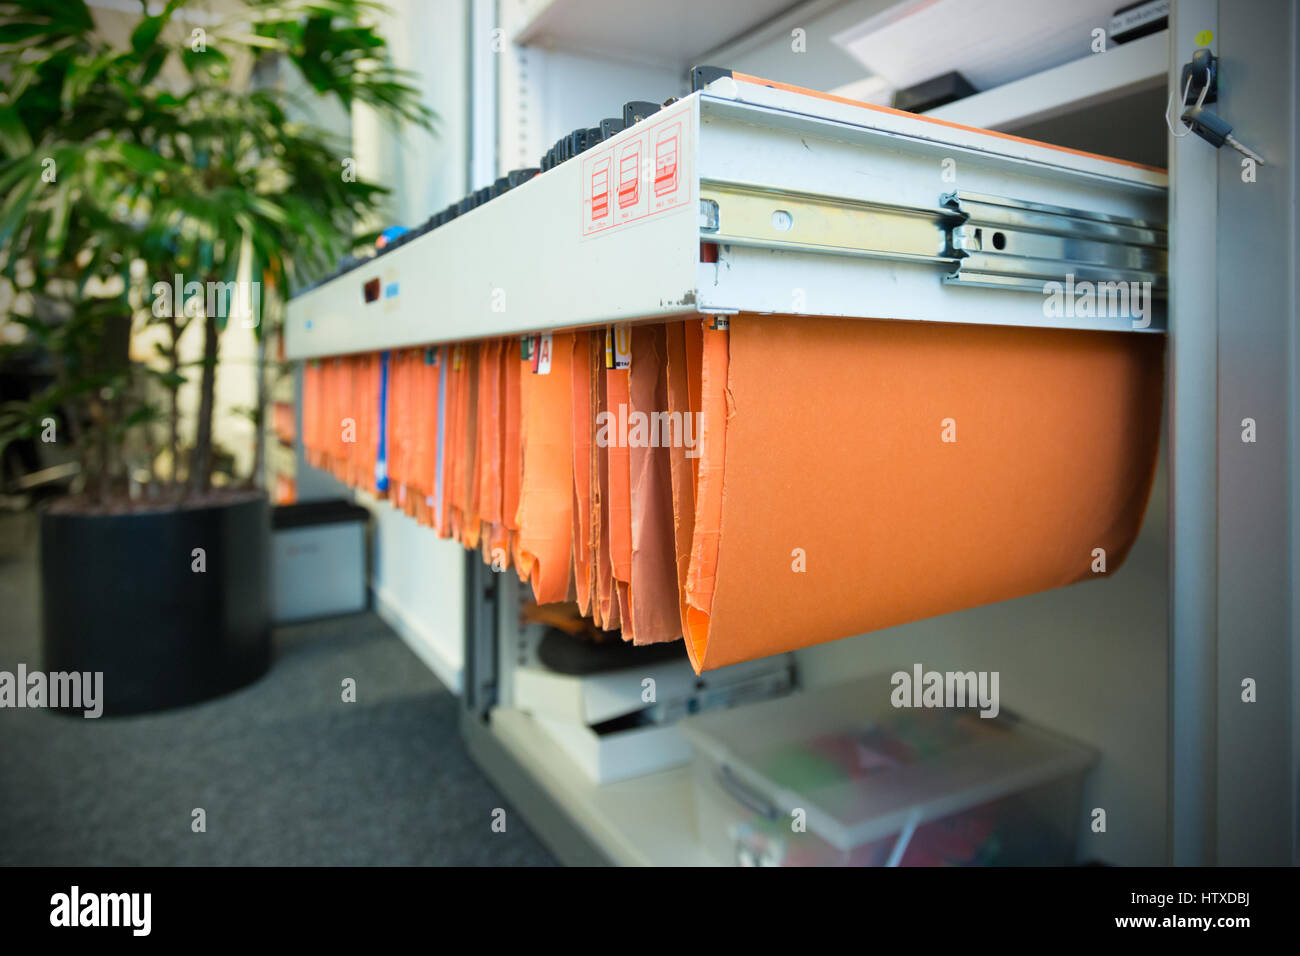 old and used orange paper File Folders in a metal filing cabinet.Cupboard with suspension files Stock Photo